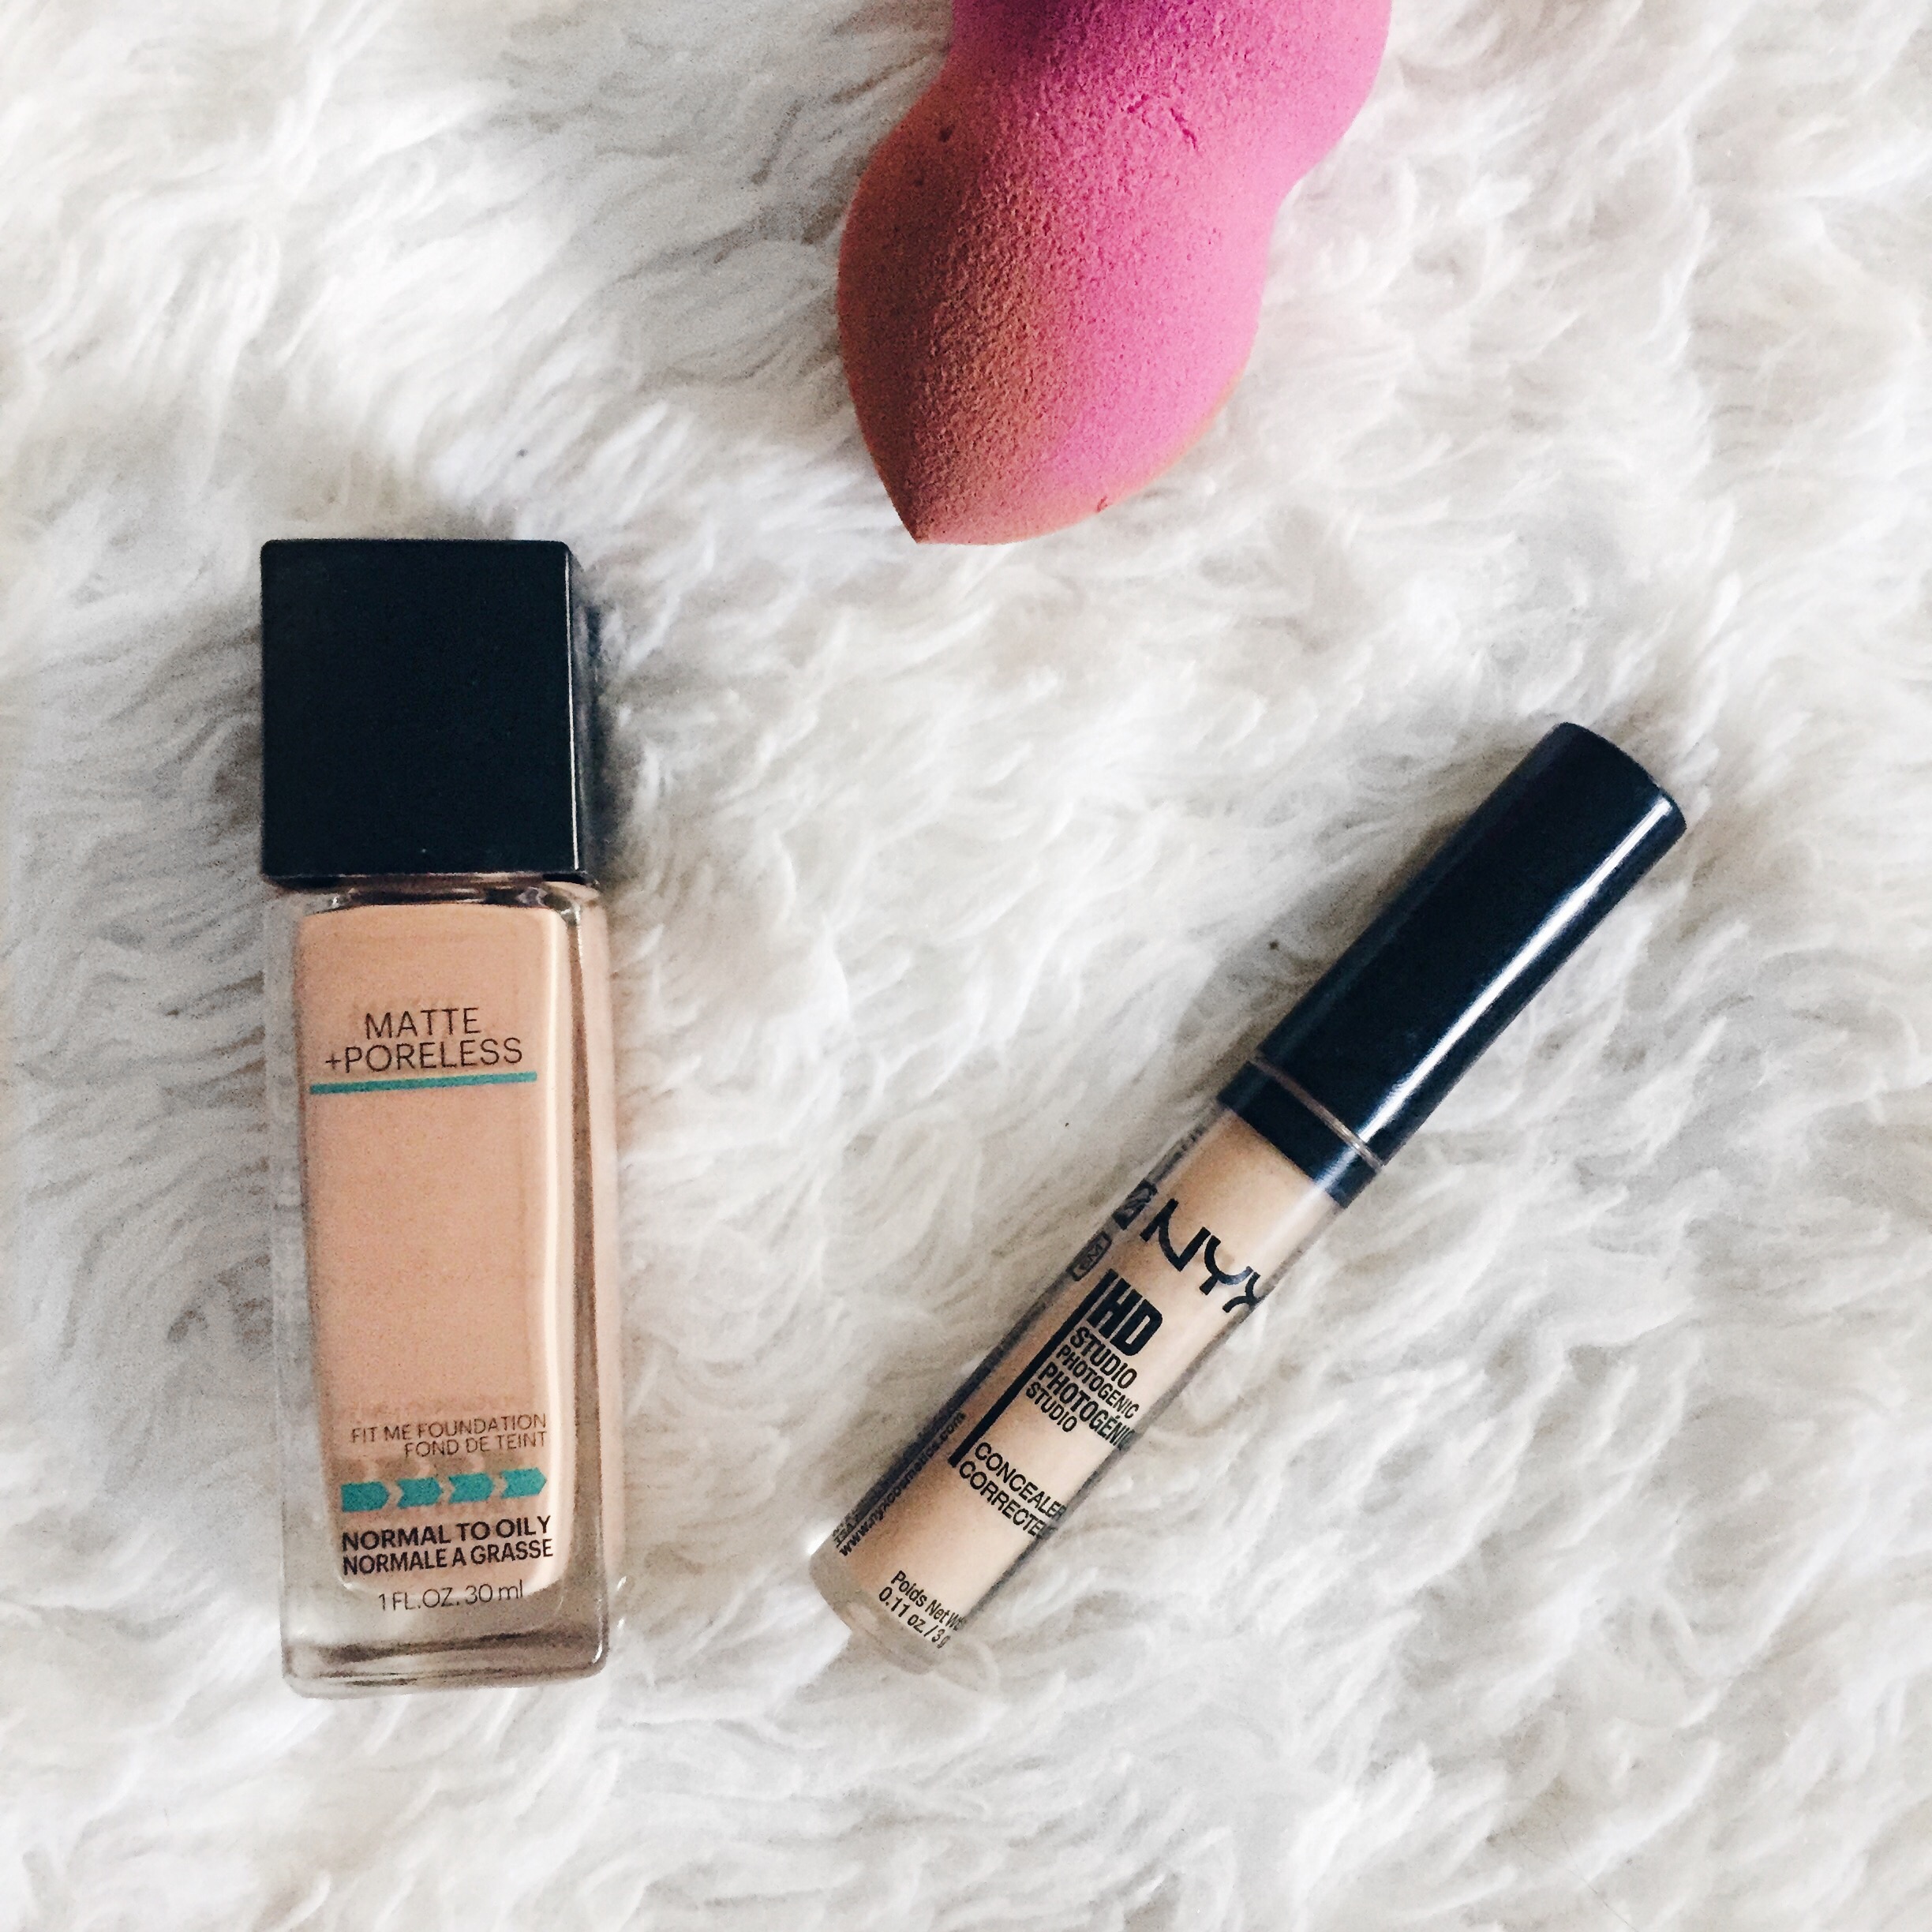 maybelline foundation and nyx concealer